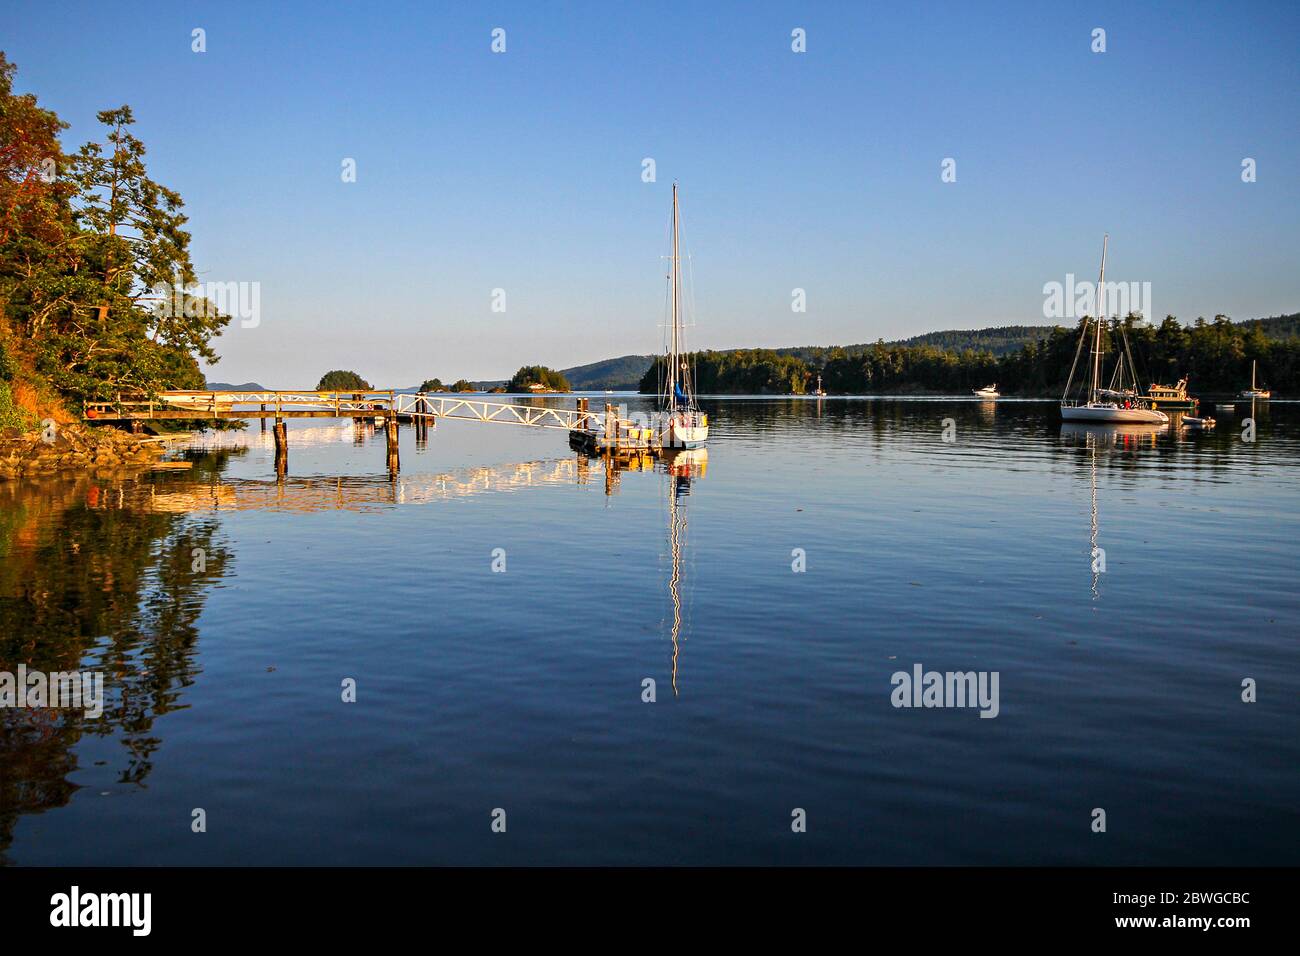 View over tranquil bay in the Salt Spring Island located in the strait of Georgia, between mainland British Columbia and Vancouver Island in Canada Stock Photo